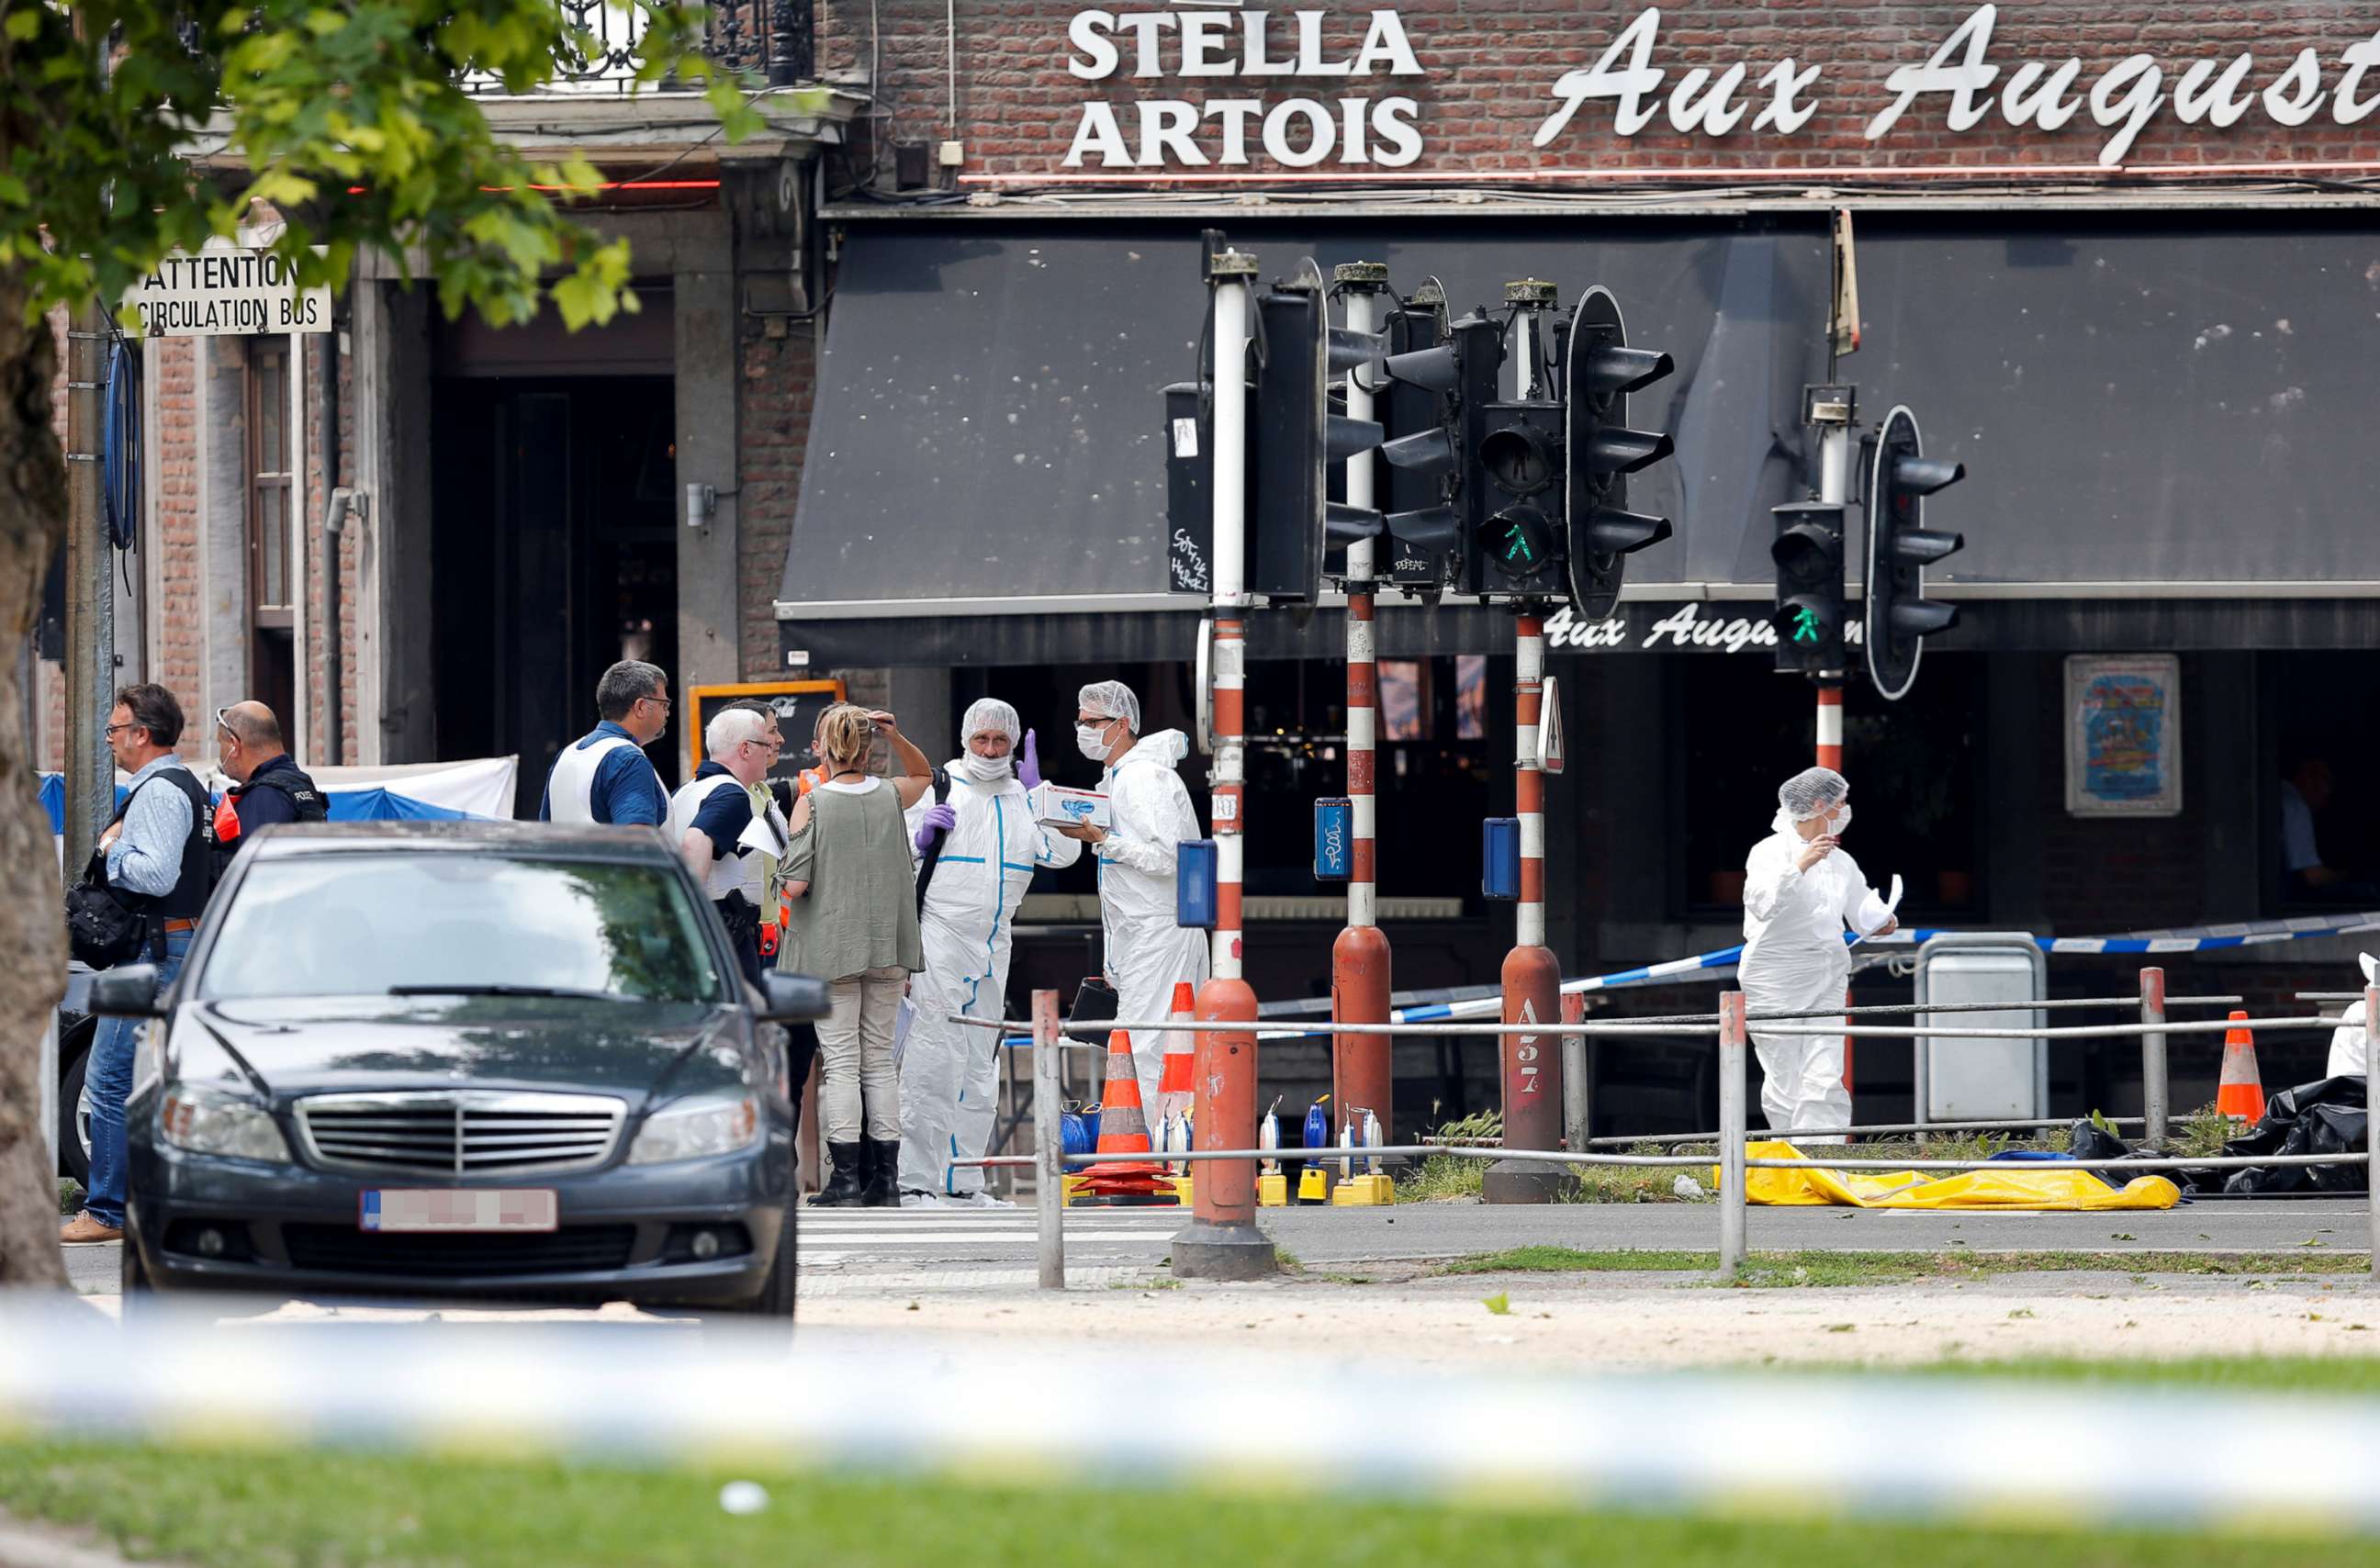 PHOTO: Police officers and forensics experts are seen on the scene of a shooting in Liege, Belgium, May 29, 2018.